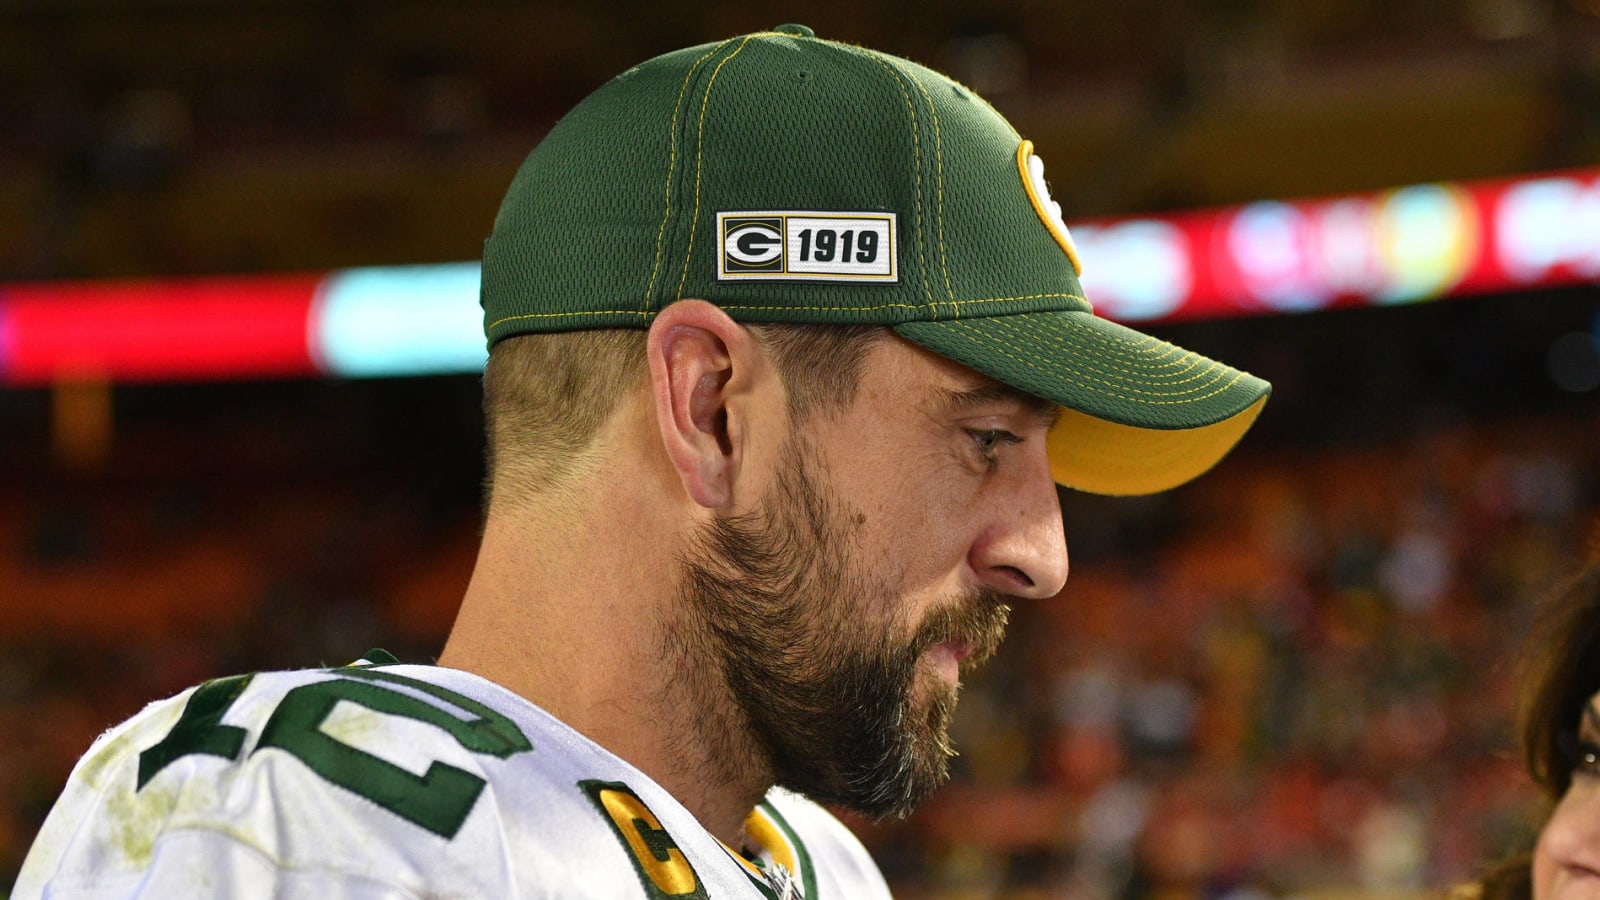 Watch: Aaron Rodgers opens up about Jordan Love pick, says he drank tequila to deal with it